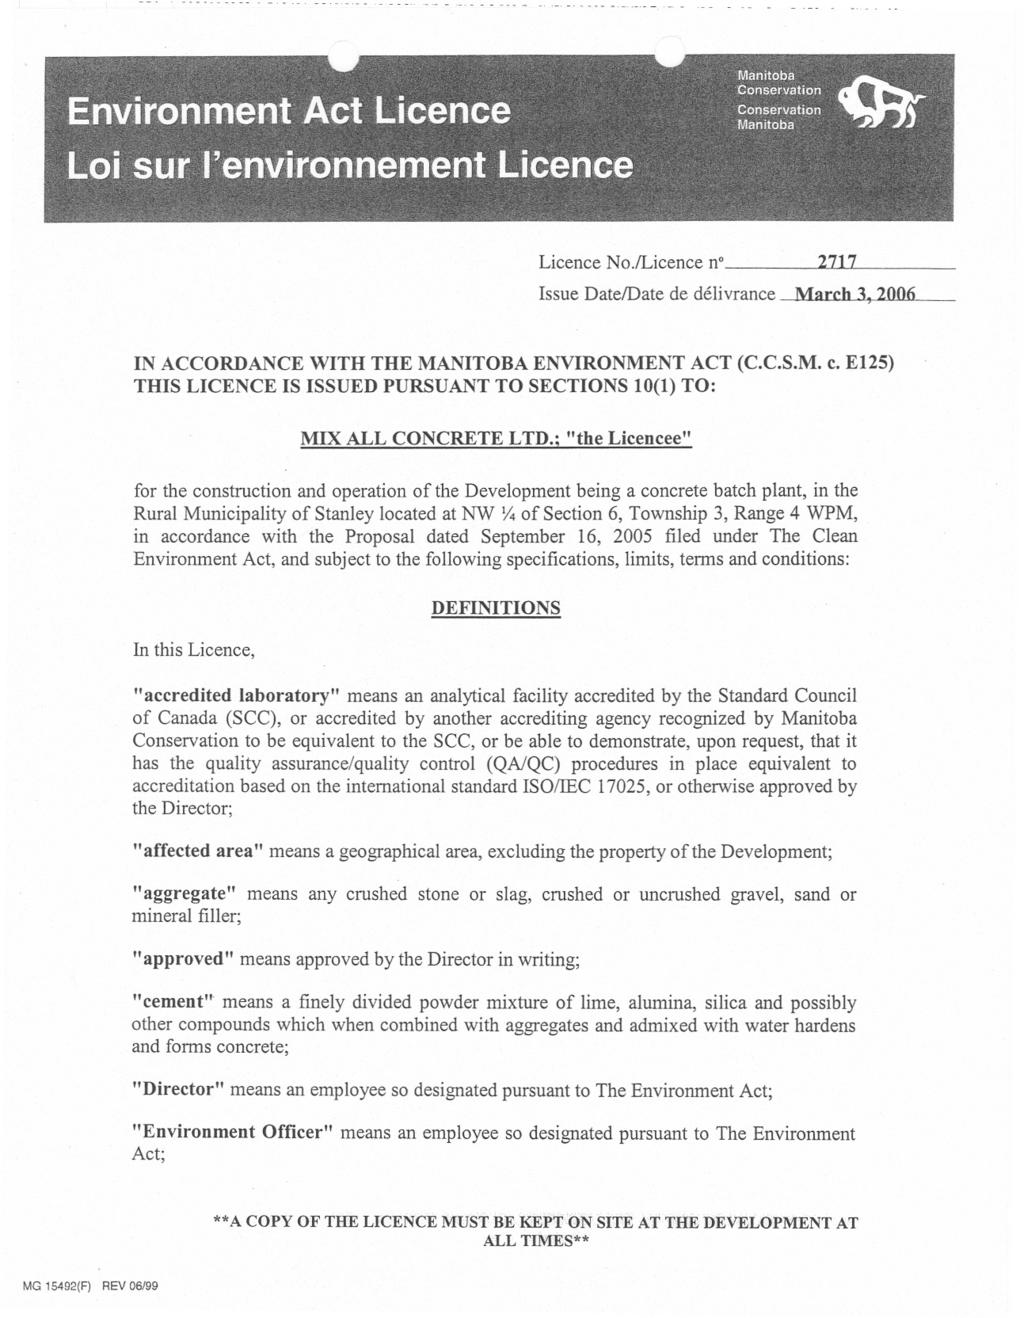 - - - - - - - -.- Licence No./Licence n 2111 Issue Date/Date de d6livrance March J. 2006 IN ACCORDANCE WITH THE MANITOBA ENVIRONMENT ACT (C.C.S.M. c.